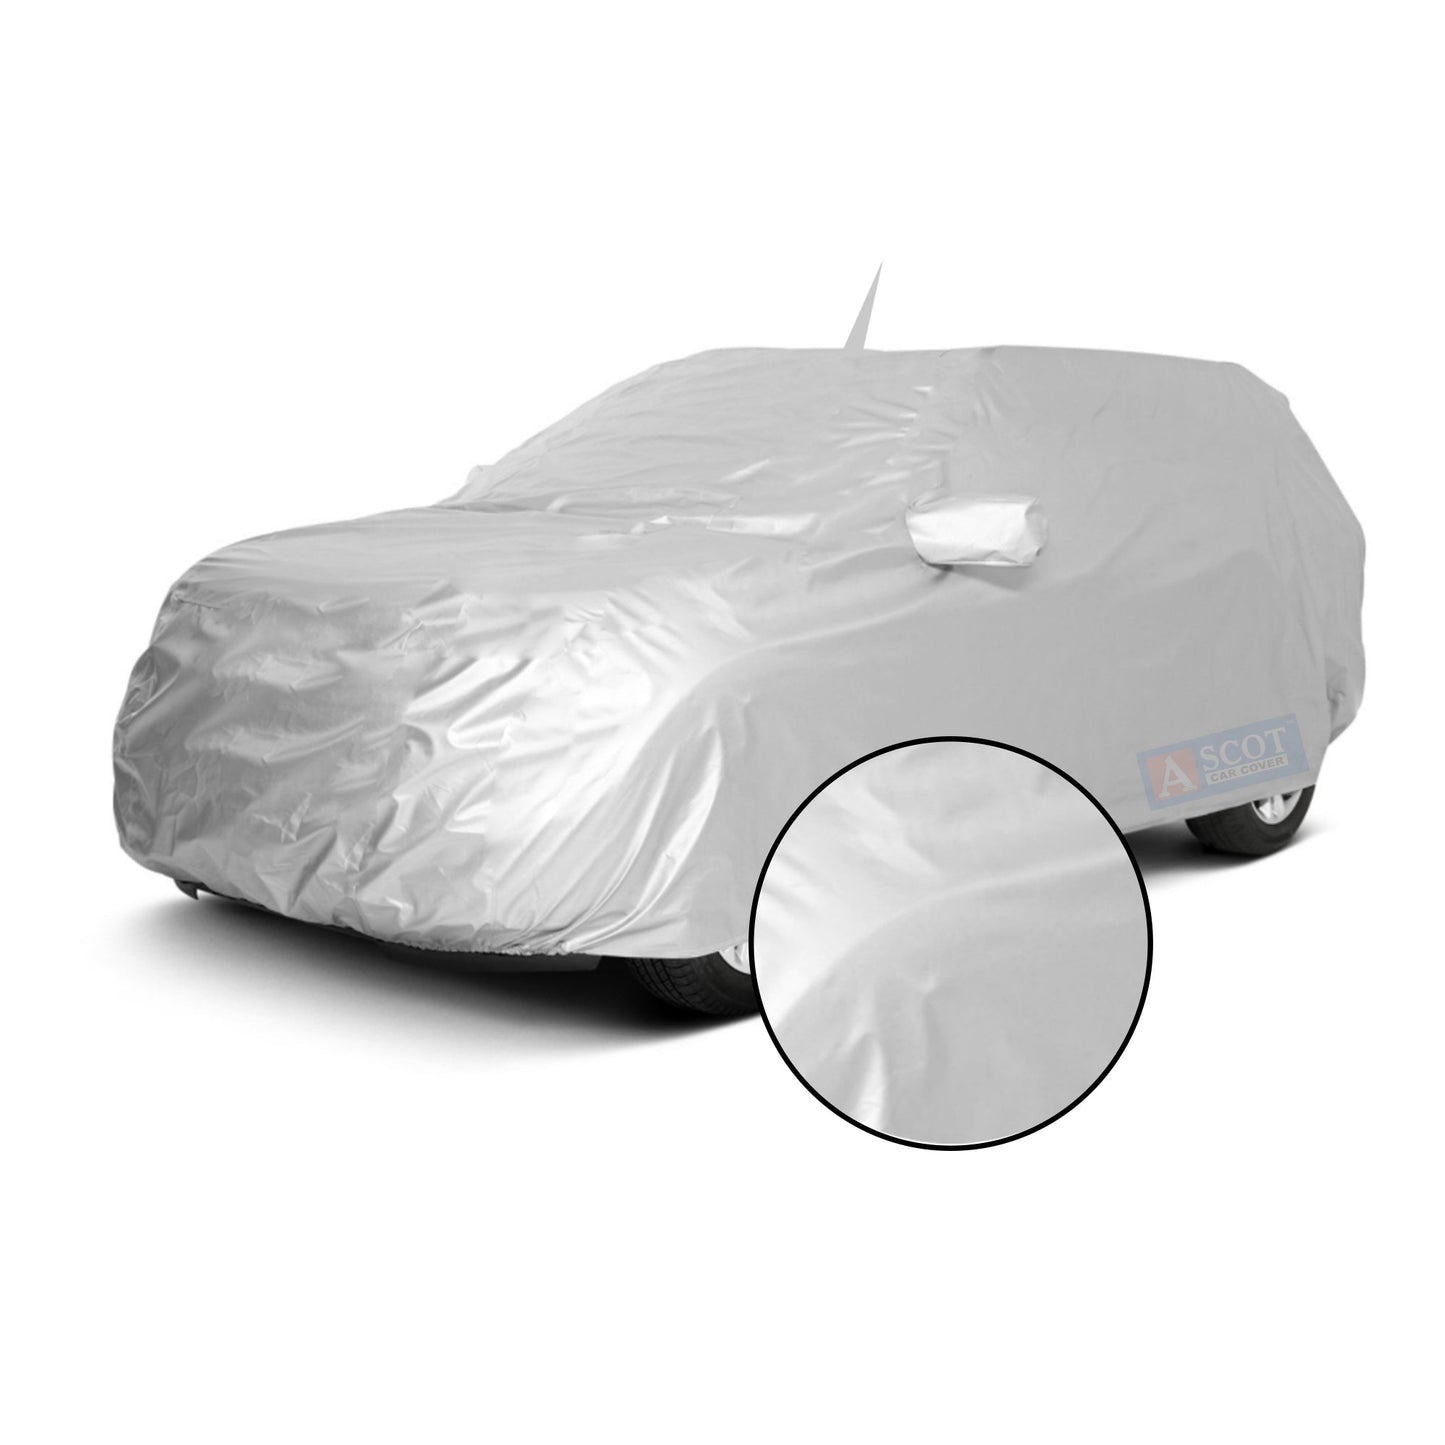 Ascot BMW X1 2009-2015 Model Car Body Cover Dust Proof, Trippel Stitched